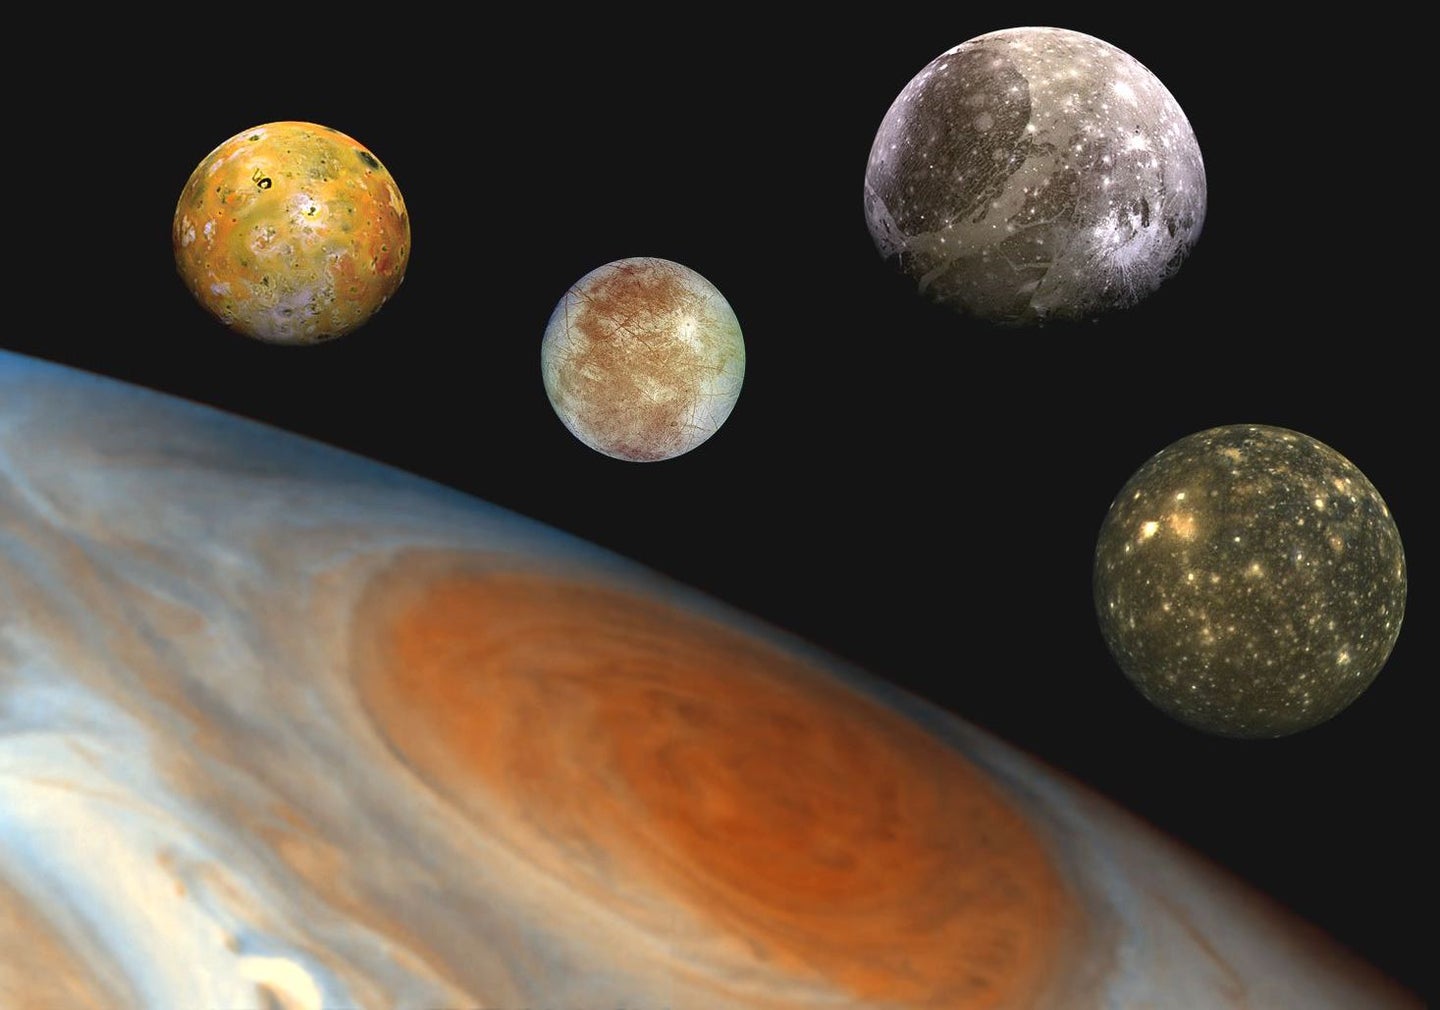 Jupiter's surface and red spot with moons in the background. the four moons in the background are yellow, pink and white, gray, and mottled yellow